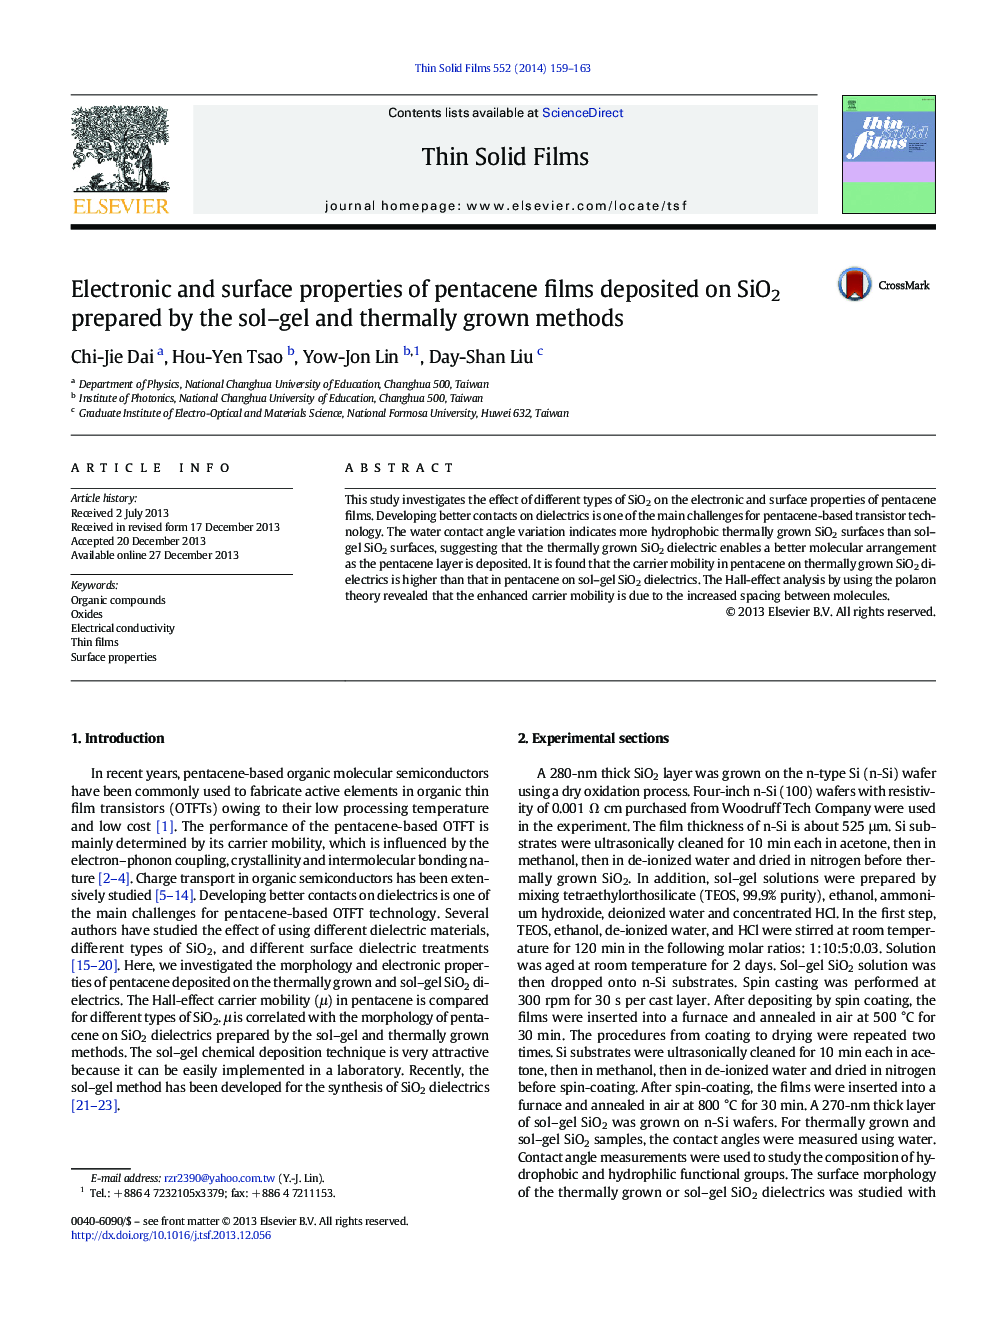 Electronic and surface properties of pentacene films deposited on SiO2 prepared by the sol–gel and thermally grown methods